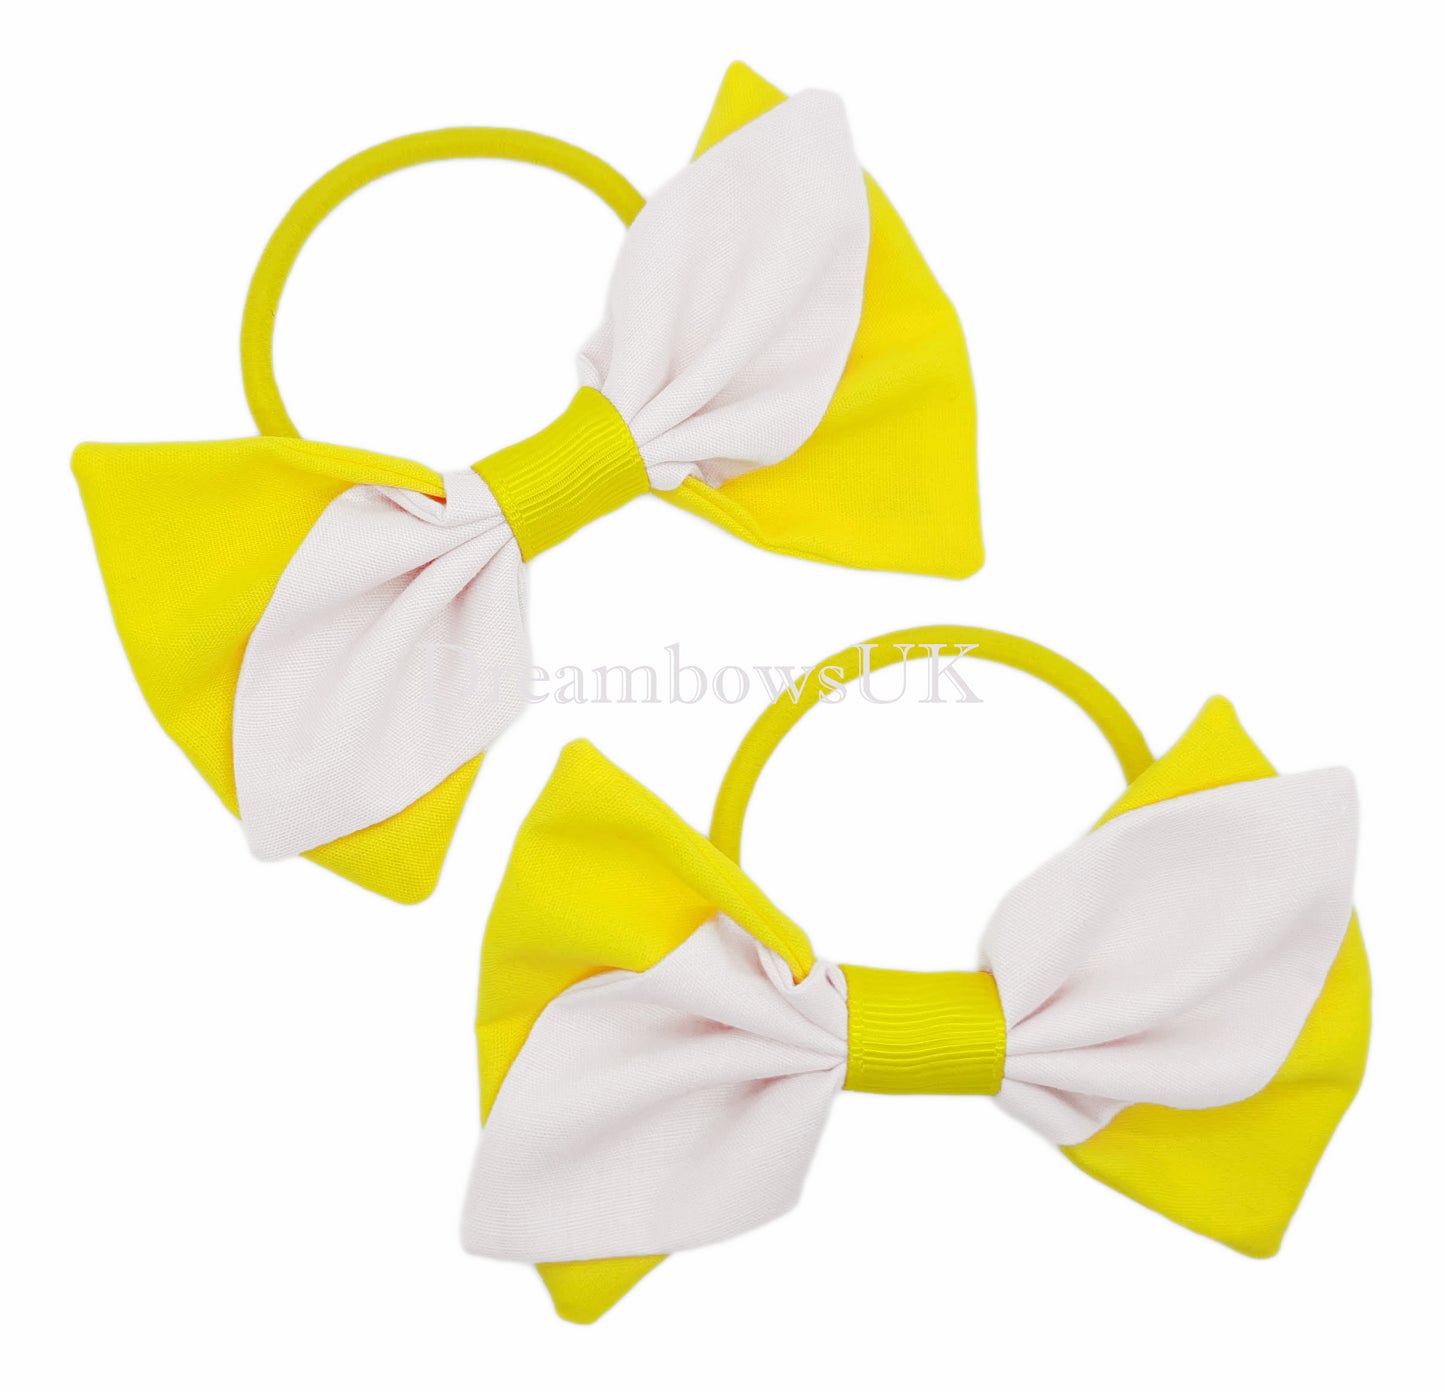 2x Yellow and white fabric hair bows